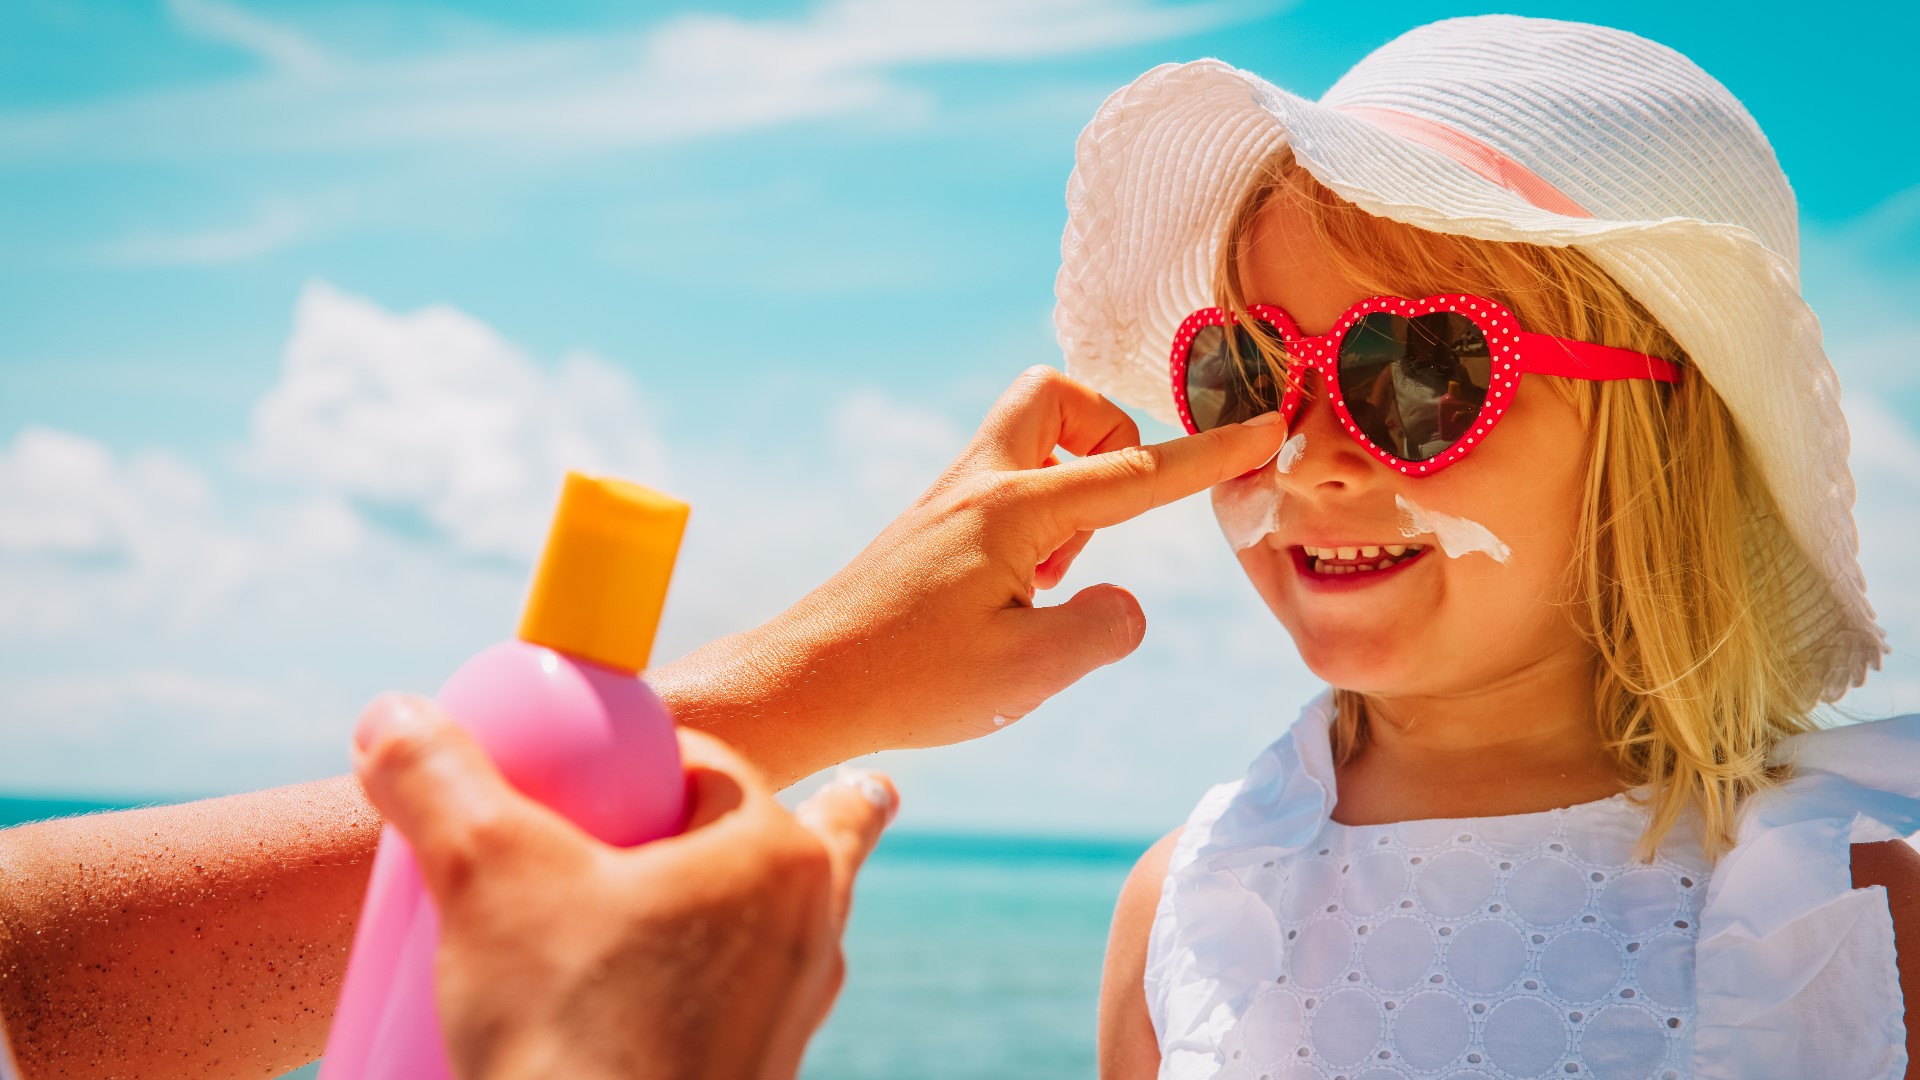 Dr. Brian Green, a pediatric dermatologist at Penn State Hershey Medical Center, shared his best advice on how to keep your children safe under the hot summer sun.